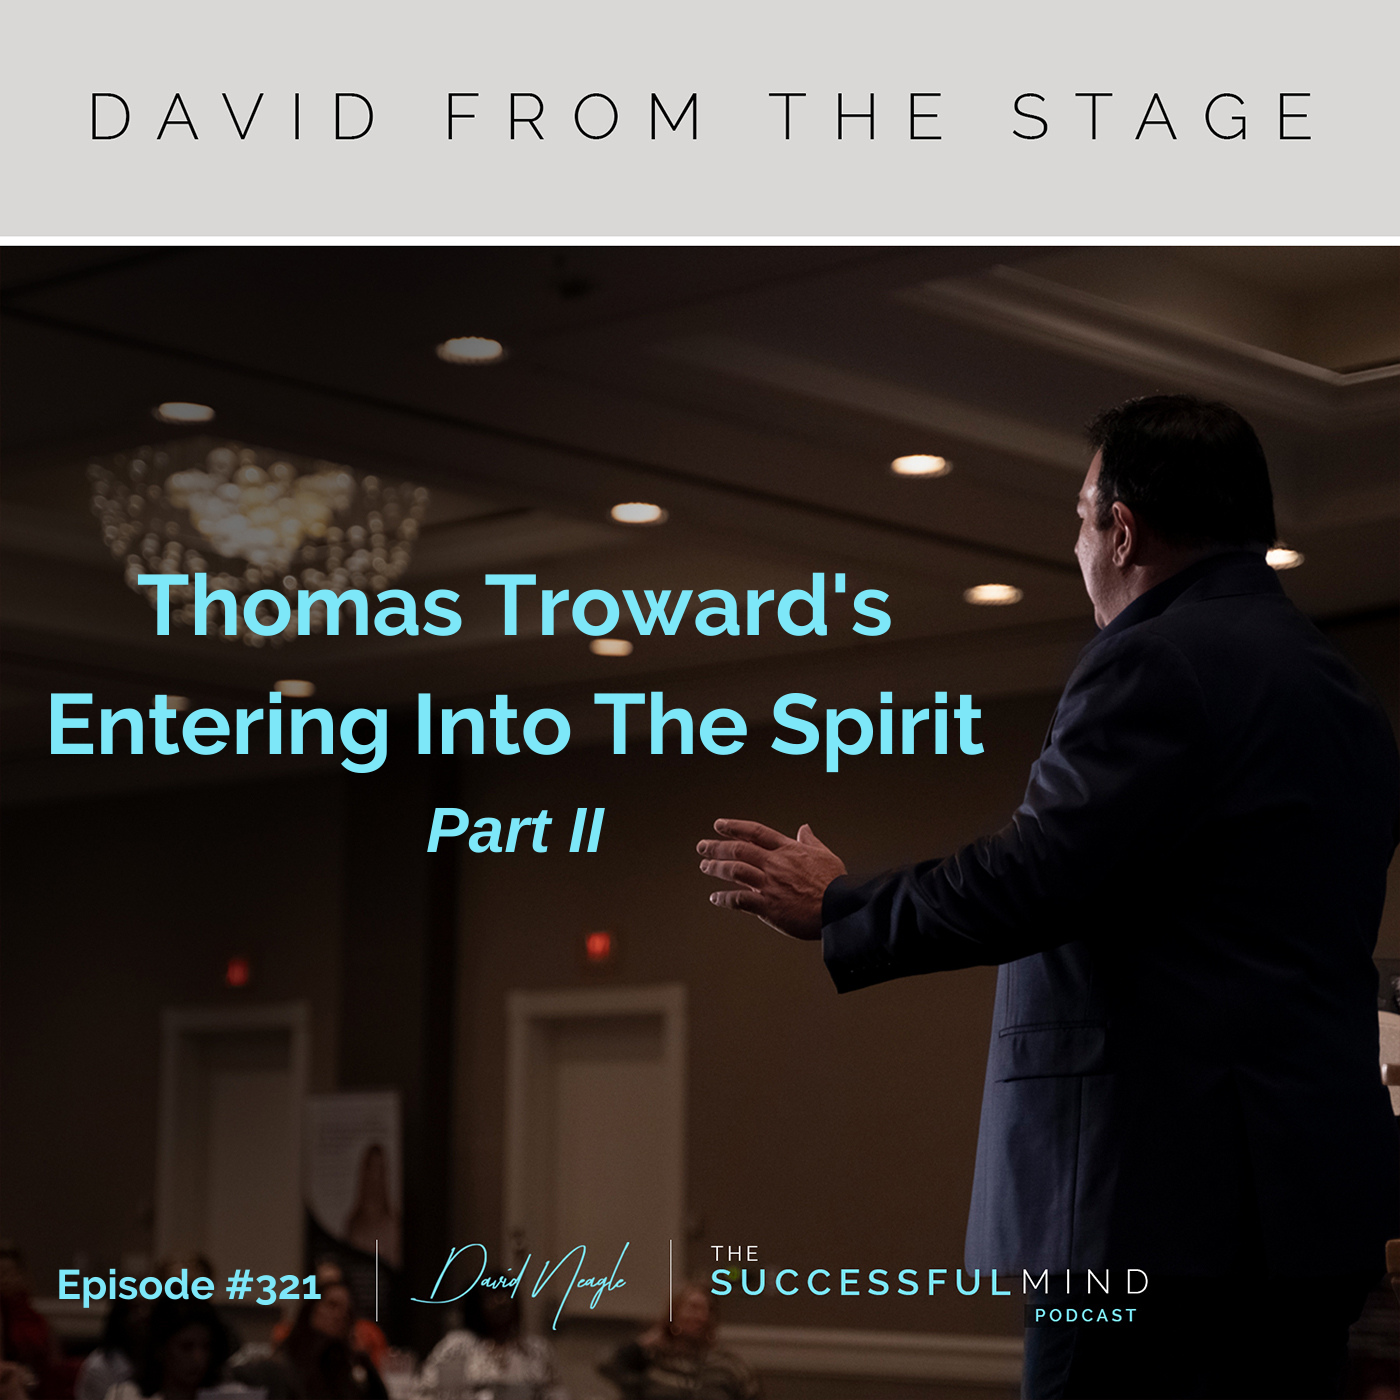 The Successful Mind Podcast - Entering Into The Spirit Part II